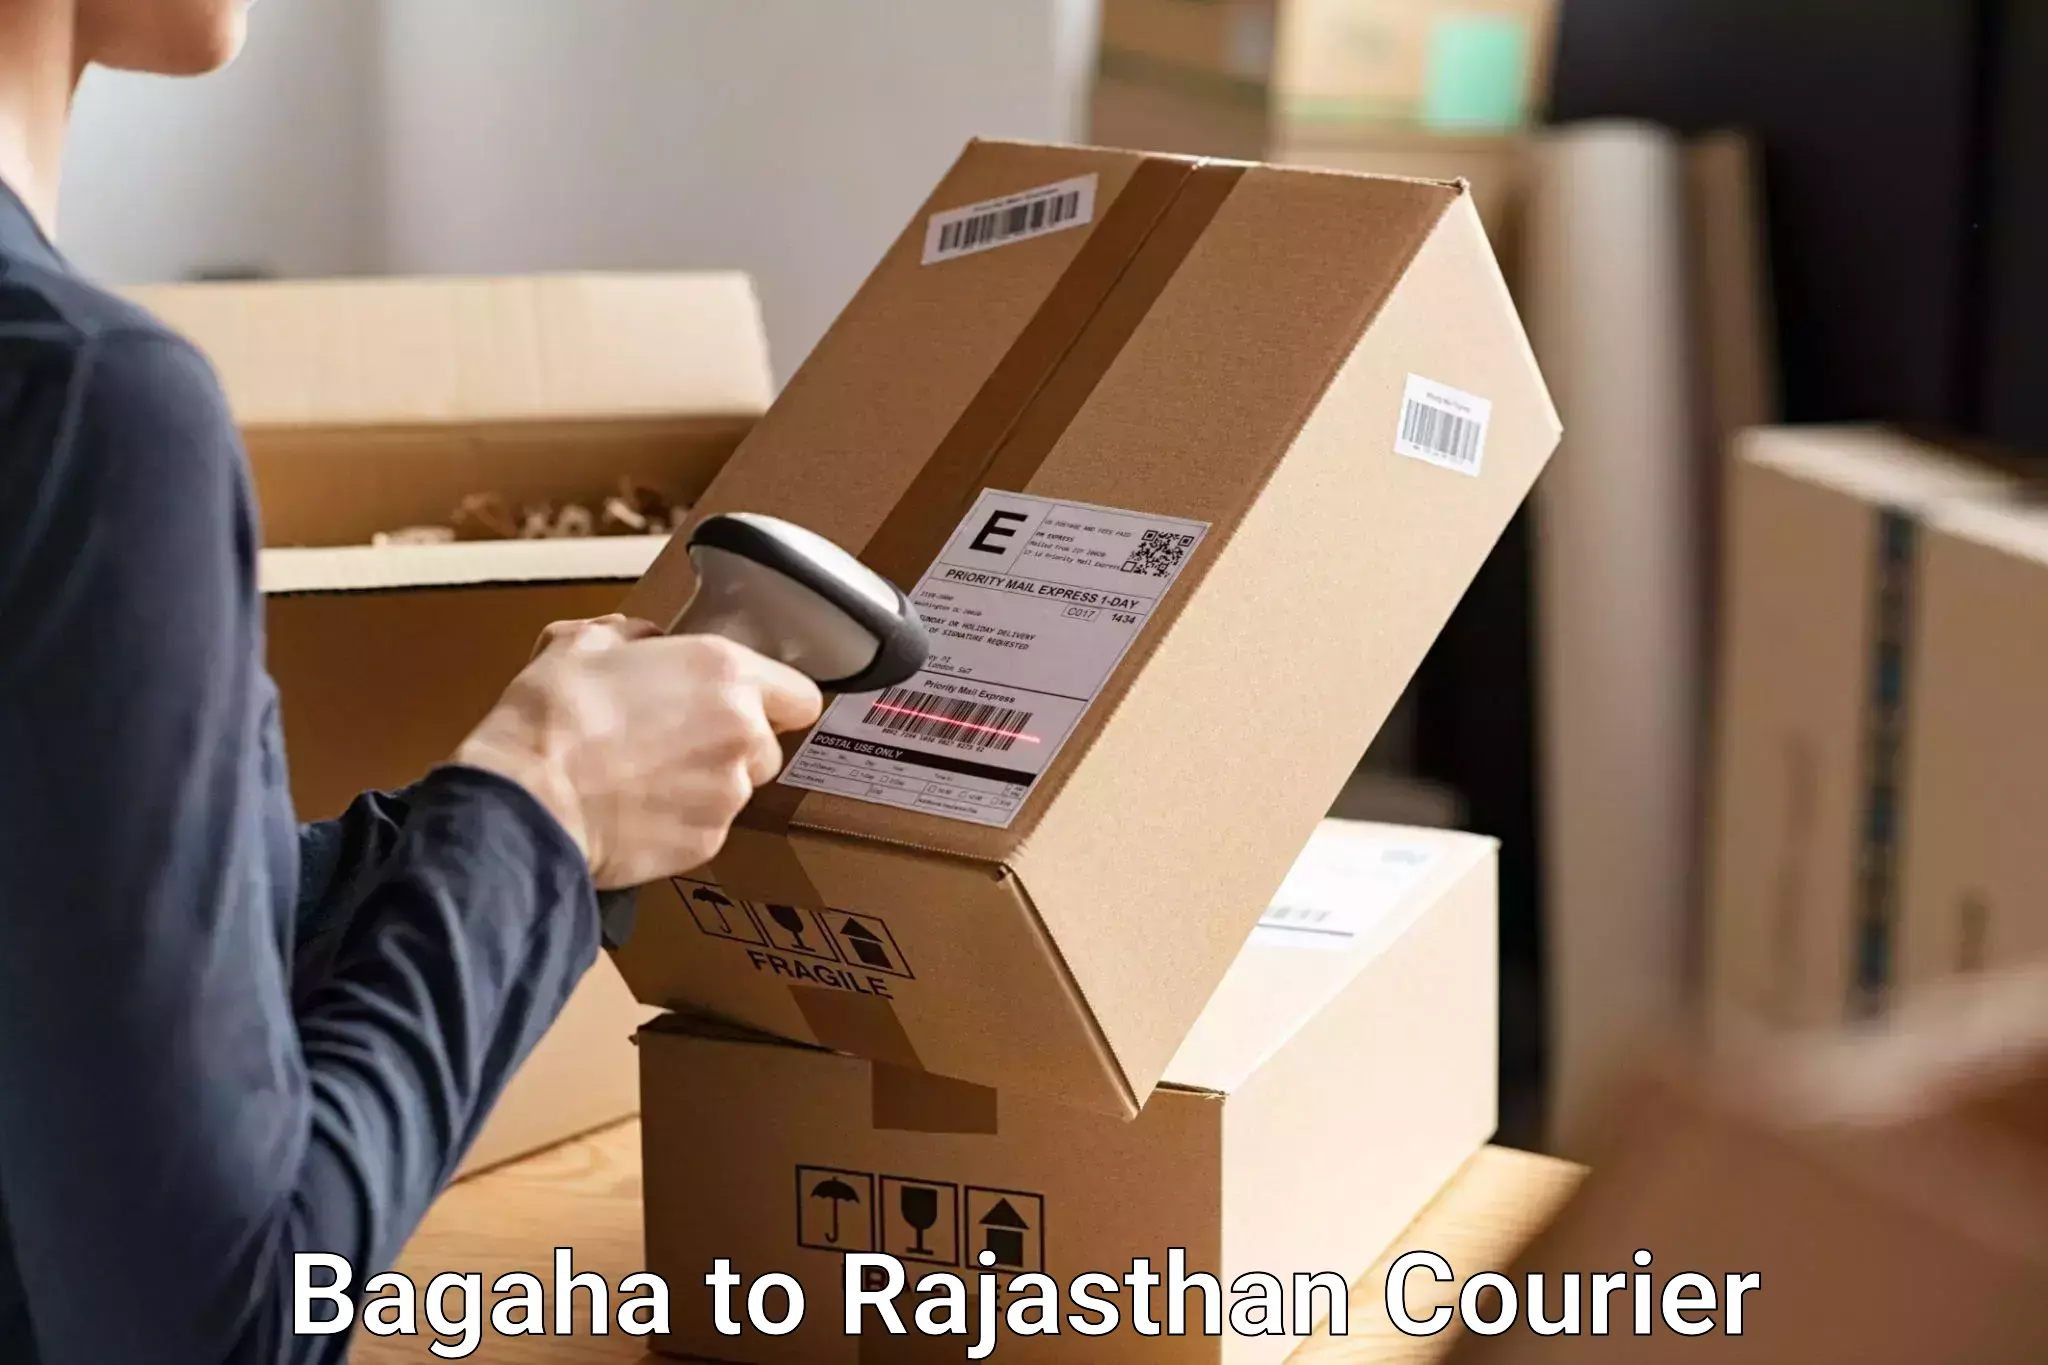 Baggage delivery management Bagaha to Rajasthan